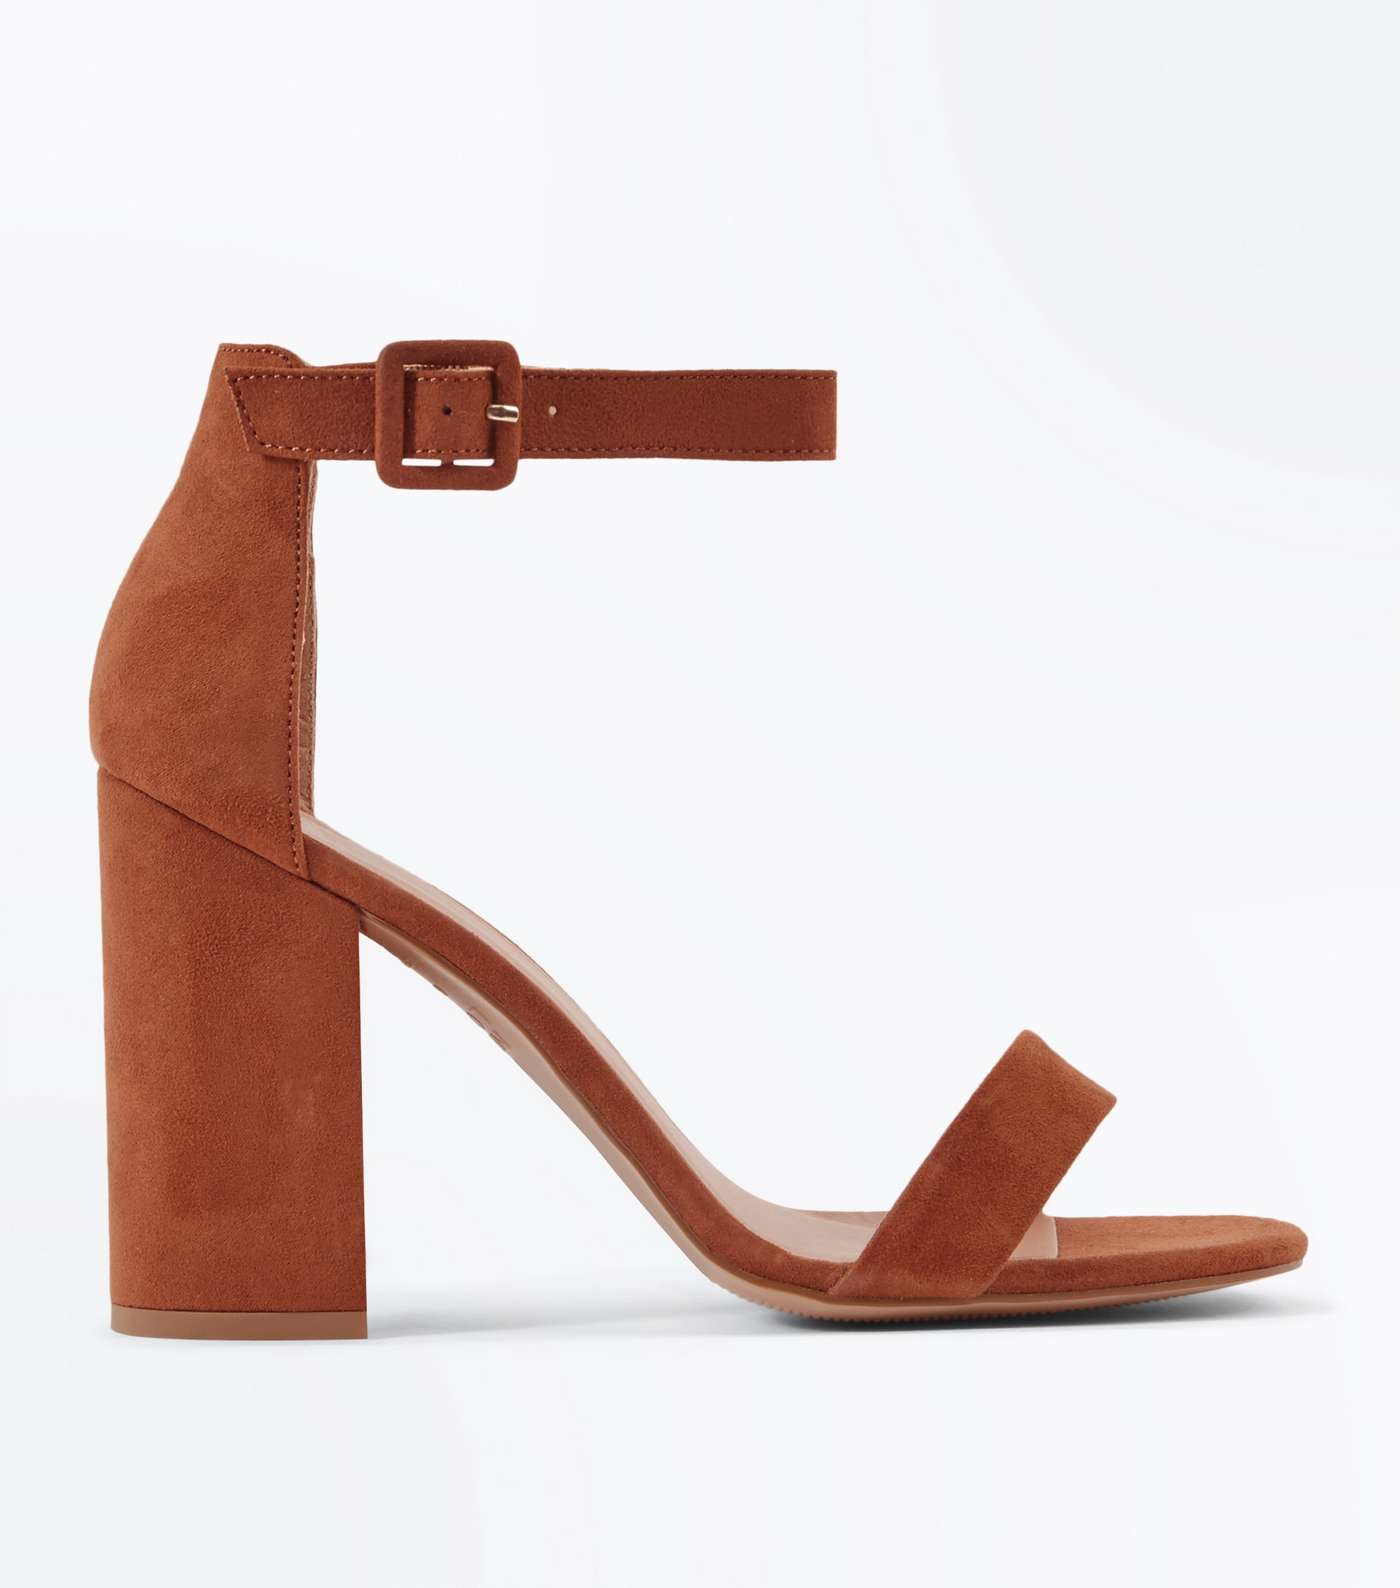 Tan Suedette Barely There Block Heels